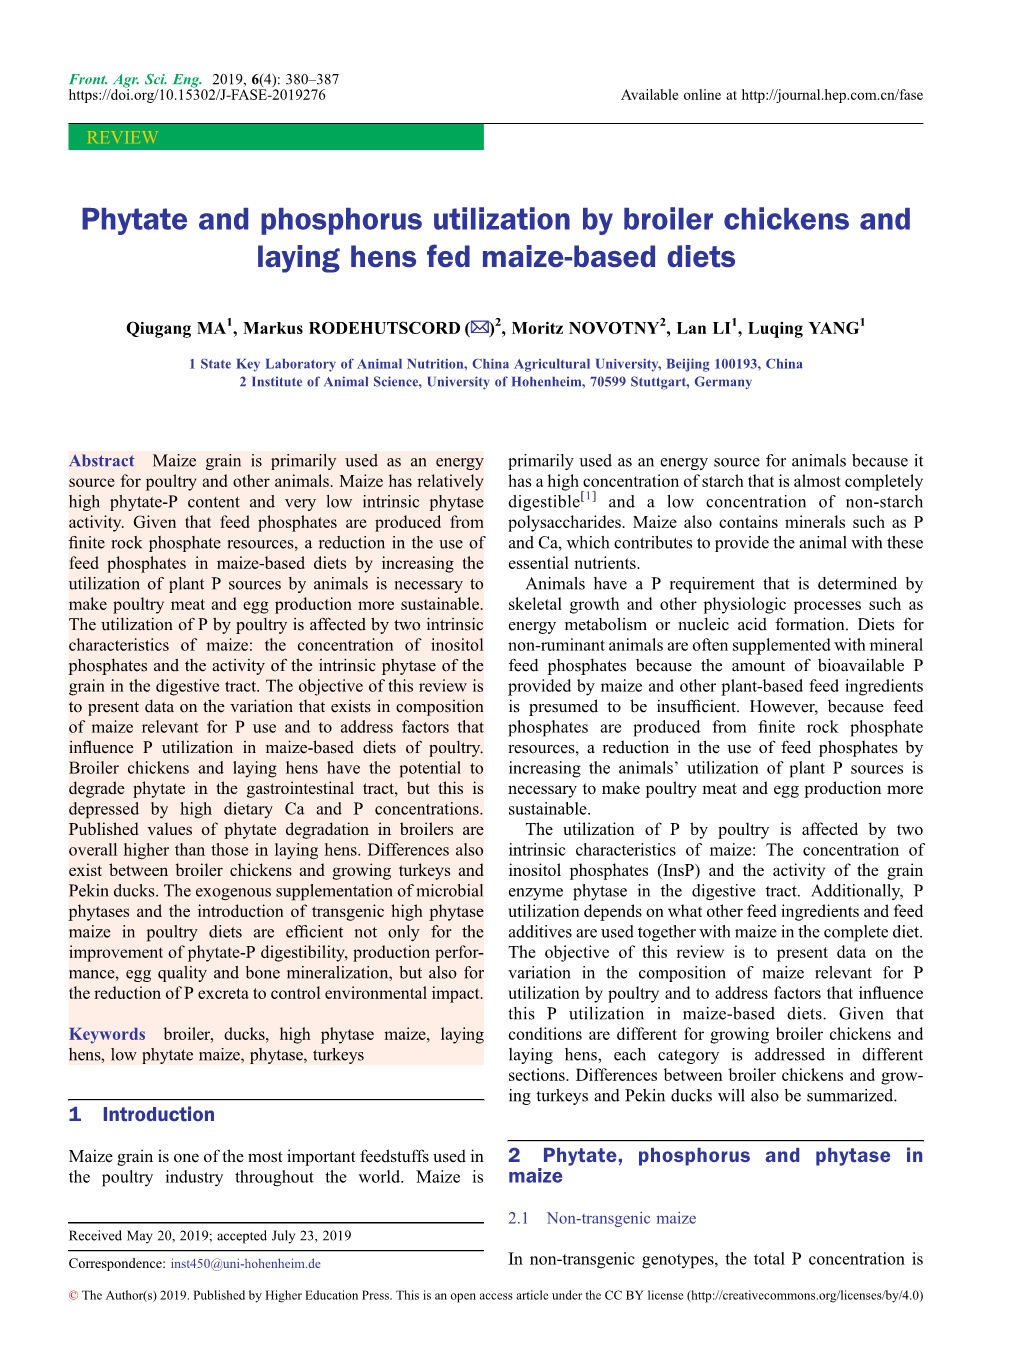 Phytate and Phosphorus Utilization by Broiler Chickens and Laying Hens Fed Maize-Based Diets